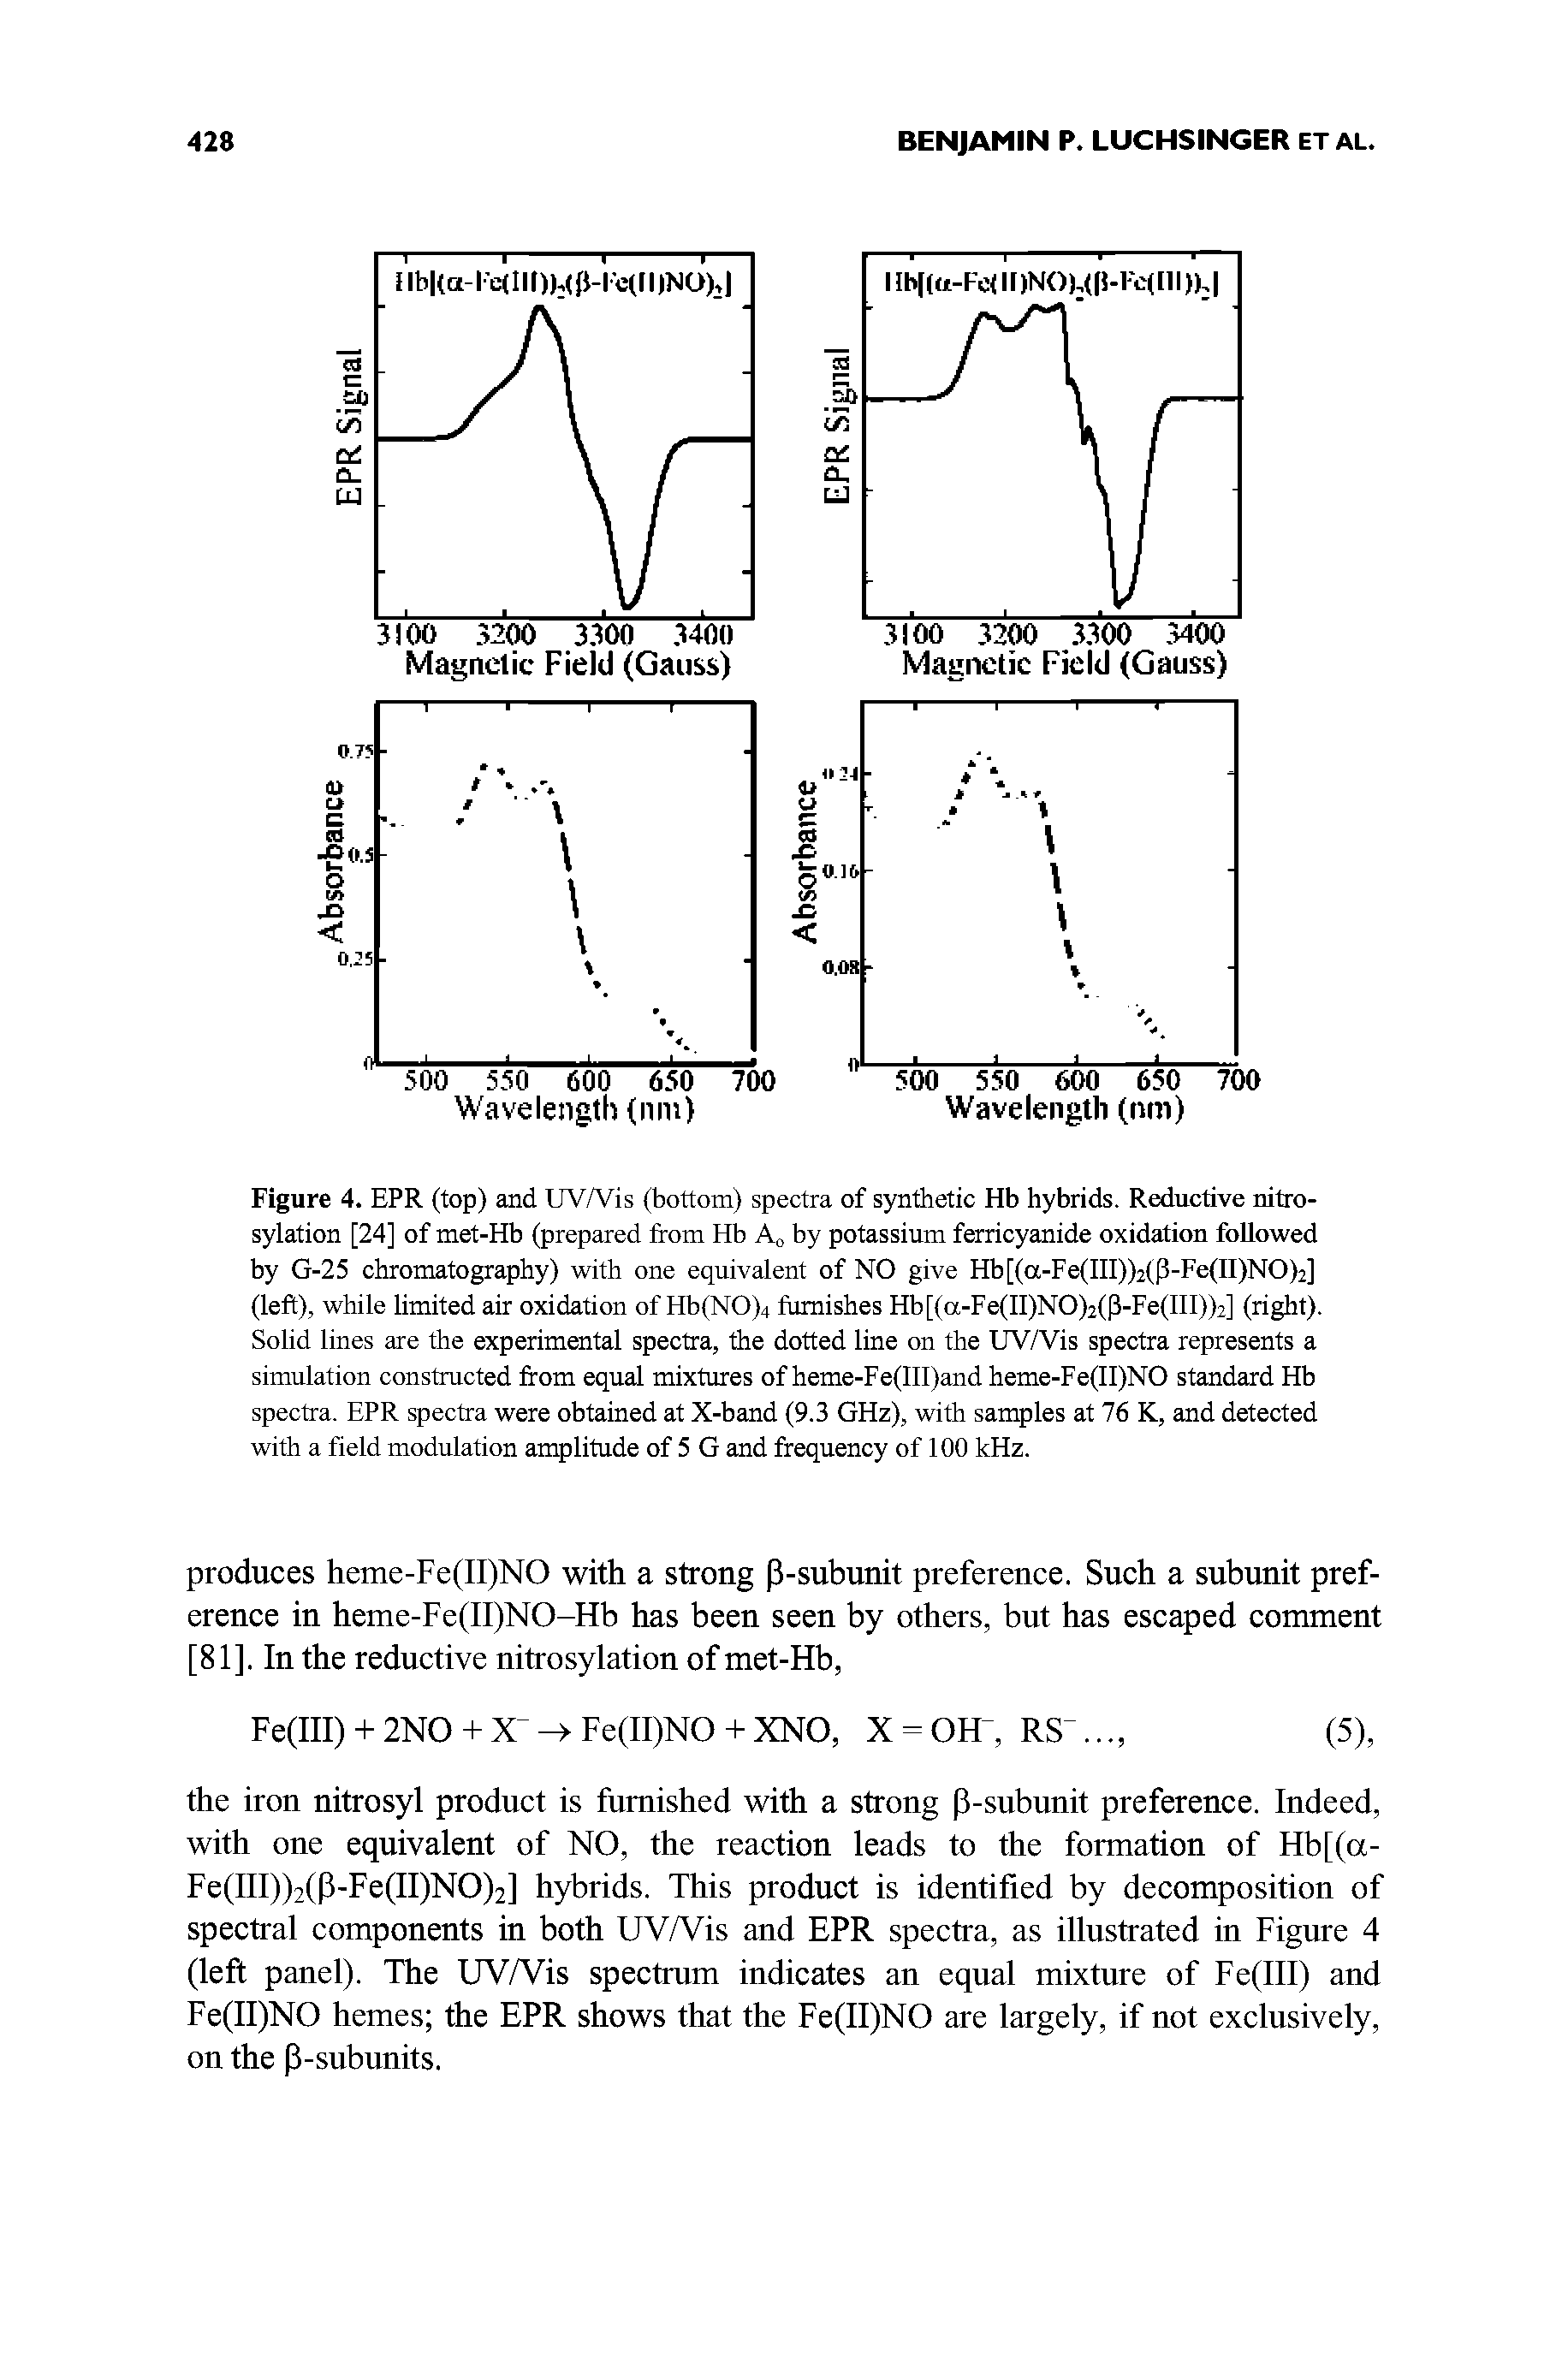 Figure 4. EPR (top) and UV/Vis (bottom) spectra of synthetic Hb hybrids. Reductive nitro-sylation [24] of met-Hb (prepared from Hb A<, by potassium ferricyanide oxidation foilowed by G-25 chromatography) with one equivalent of NO give Hb[(a-Fe(III))2(P-Fe(II)NO)2] (left), while limited air oxidation of Hb(NO)4 furnishes Hb[(a-Fe(II)NO)2(P-Fe(III))2] (right). SoUd lines are the experimental spectra, the dotted line on the UVA is spectra represents a simulation constructed from equal mixtures of heme-Fe(lll)and heme-Fe(II)NO standard Hb spectra. EPR spectra were obtained at X-band (9.3 GHz), with sanities at 76 K, and detected with a field modulation anqilitude of 5 G and frequency of 100 kHz.